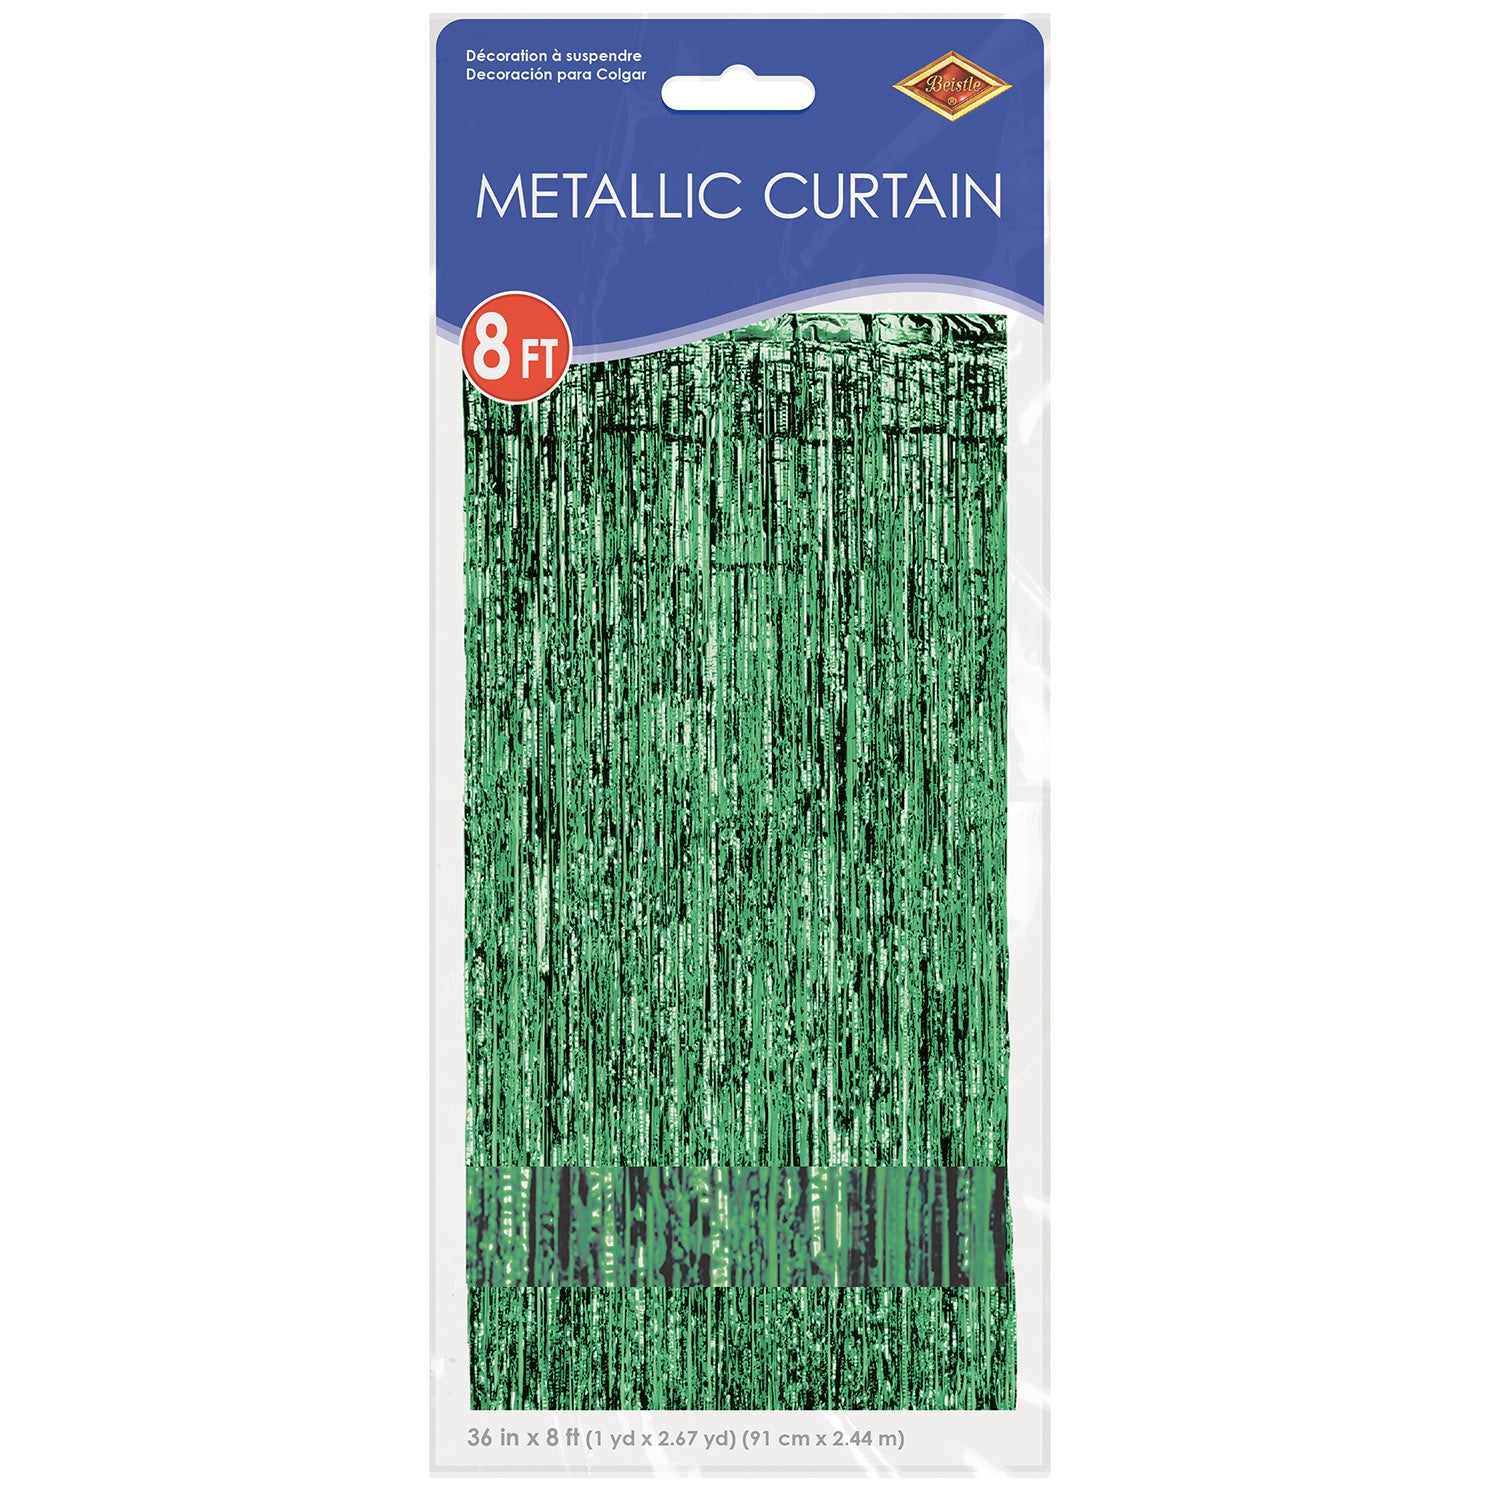 Metallic Foil Curtain in Black, Red, Teal, Silver, Blue  or Green